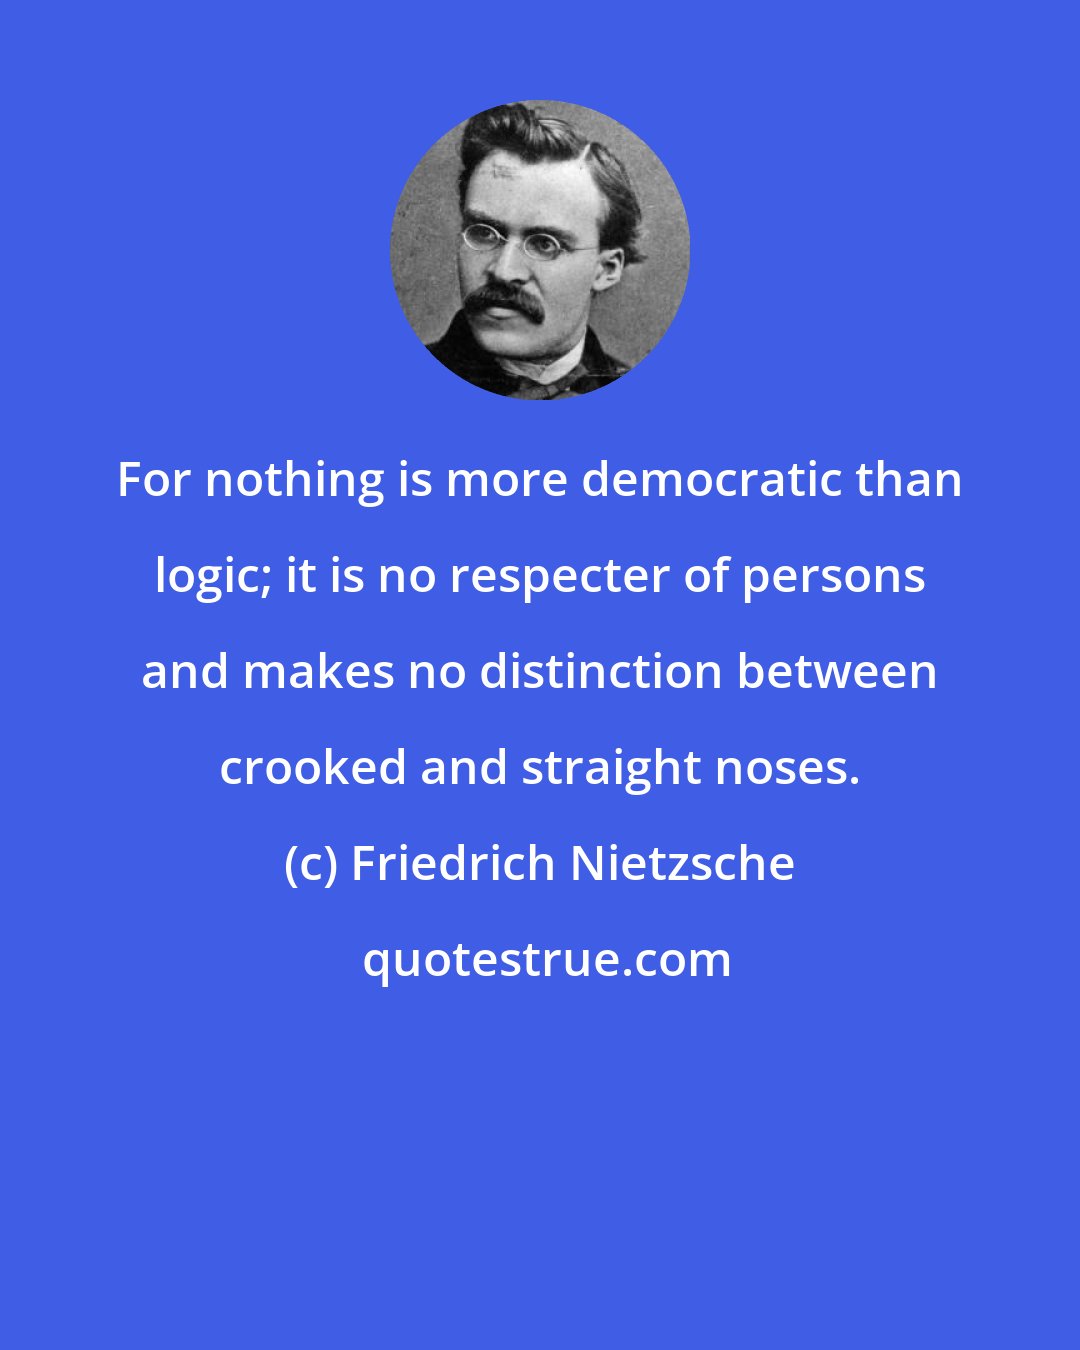 Friedrich Nietzsche: For nothing is more democratic than logic; it is no respecter of persons and makes no distinction between crooked and straight noses.